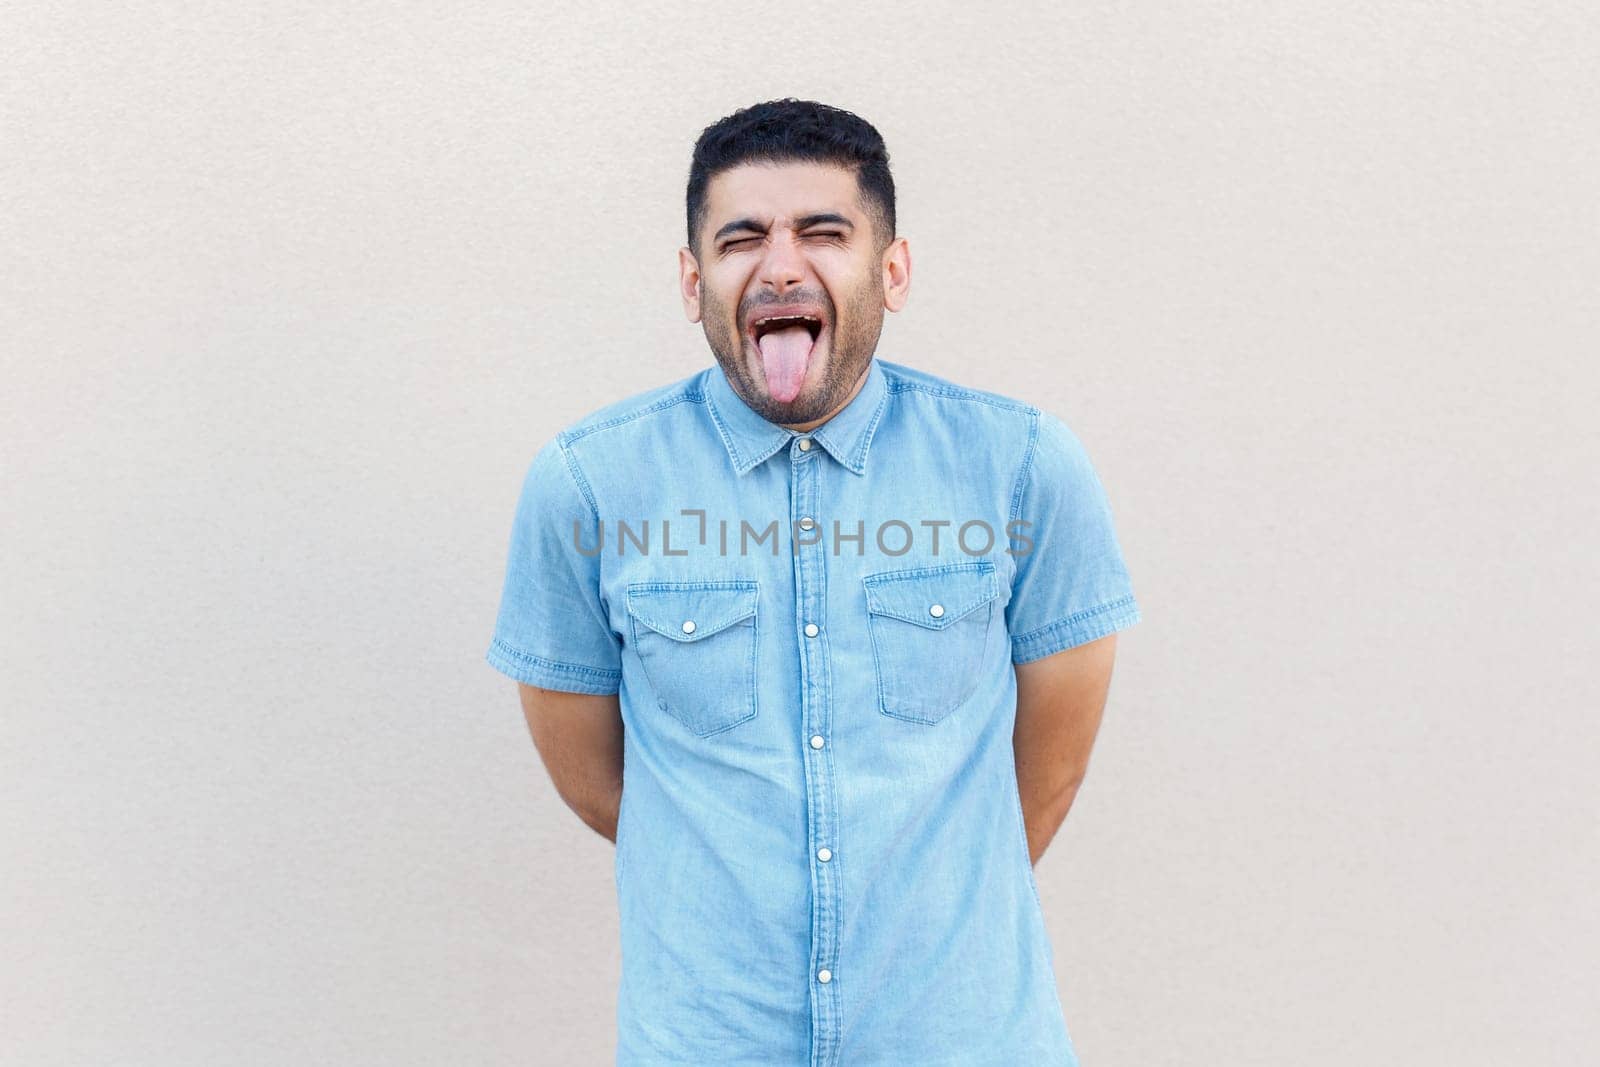 Portrait of funny crazy handsome man wearing denim shirt standing with closed eyes and showing tongue out, demonstrates childish behavior. Indoor studio shot isolated on gray background.